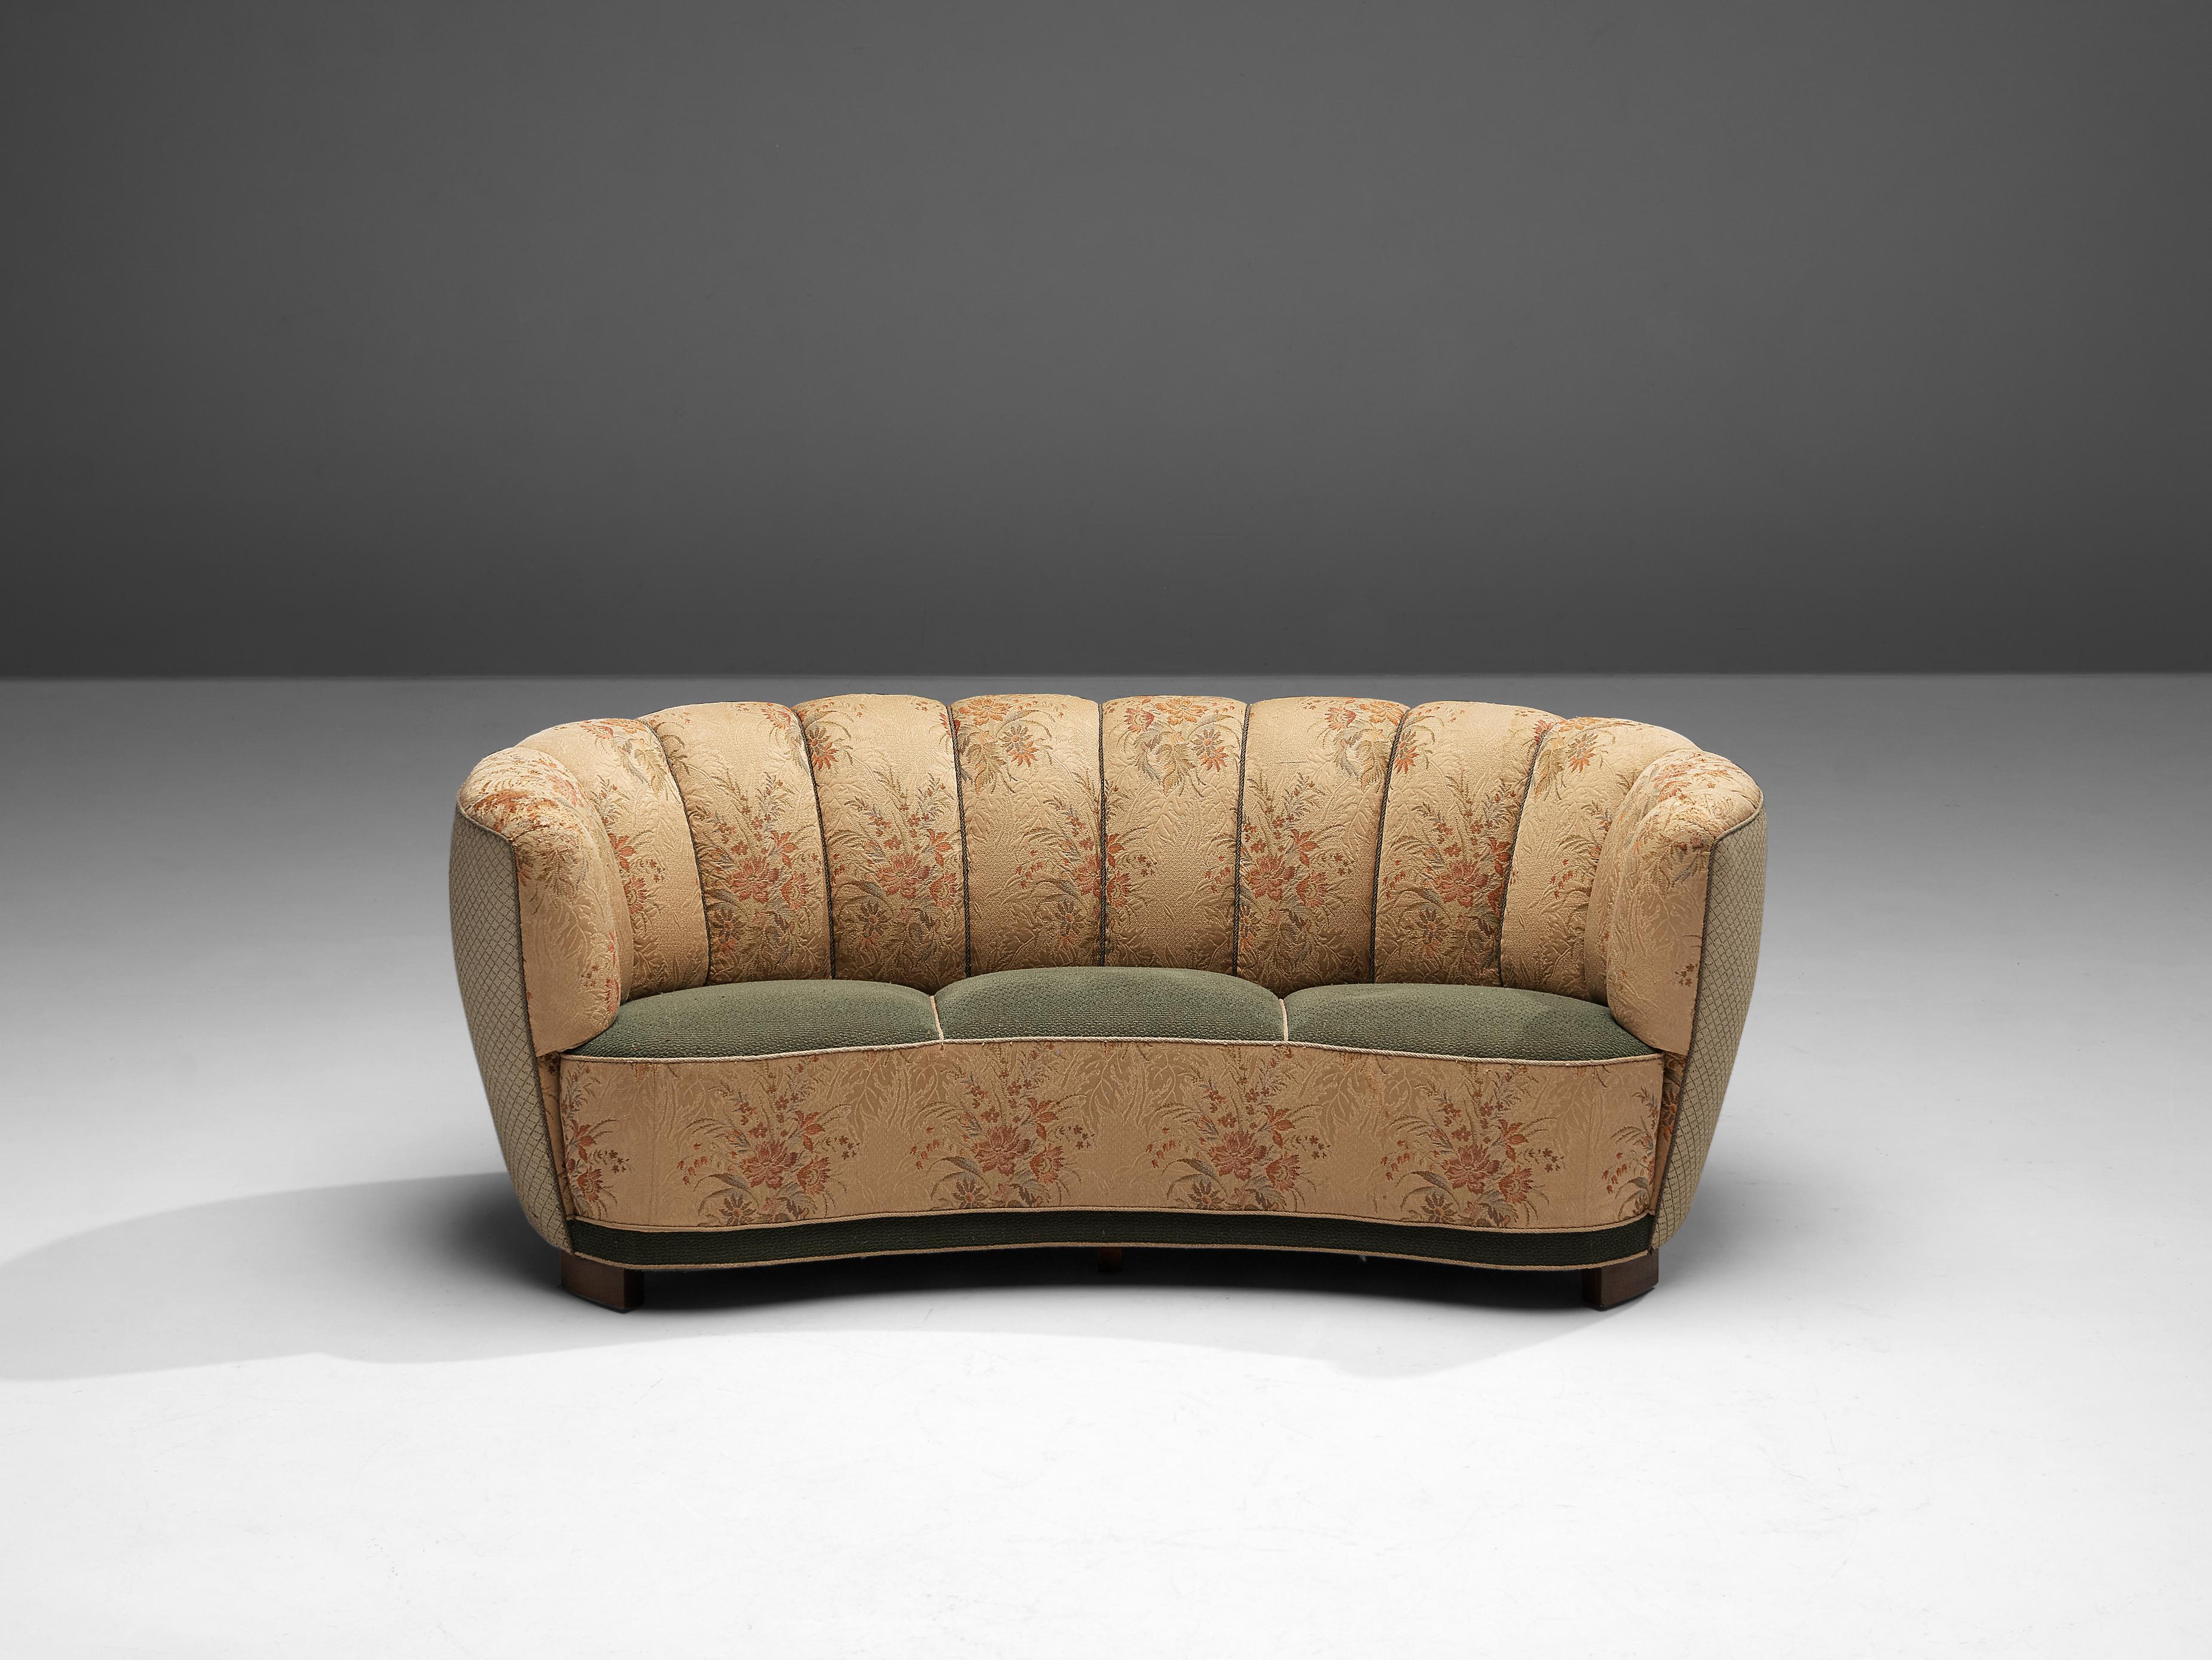 Banana sofa, floral upholstery, wood, Denmark, 1940s.

This voluptuous sofa is executed in a floral fabric with wooden legs. The sofa has a high lined and curved back. The backrest is curved and flows over into the bulky, rounded armrests. The